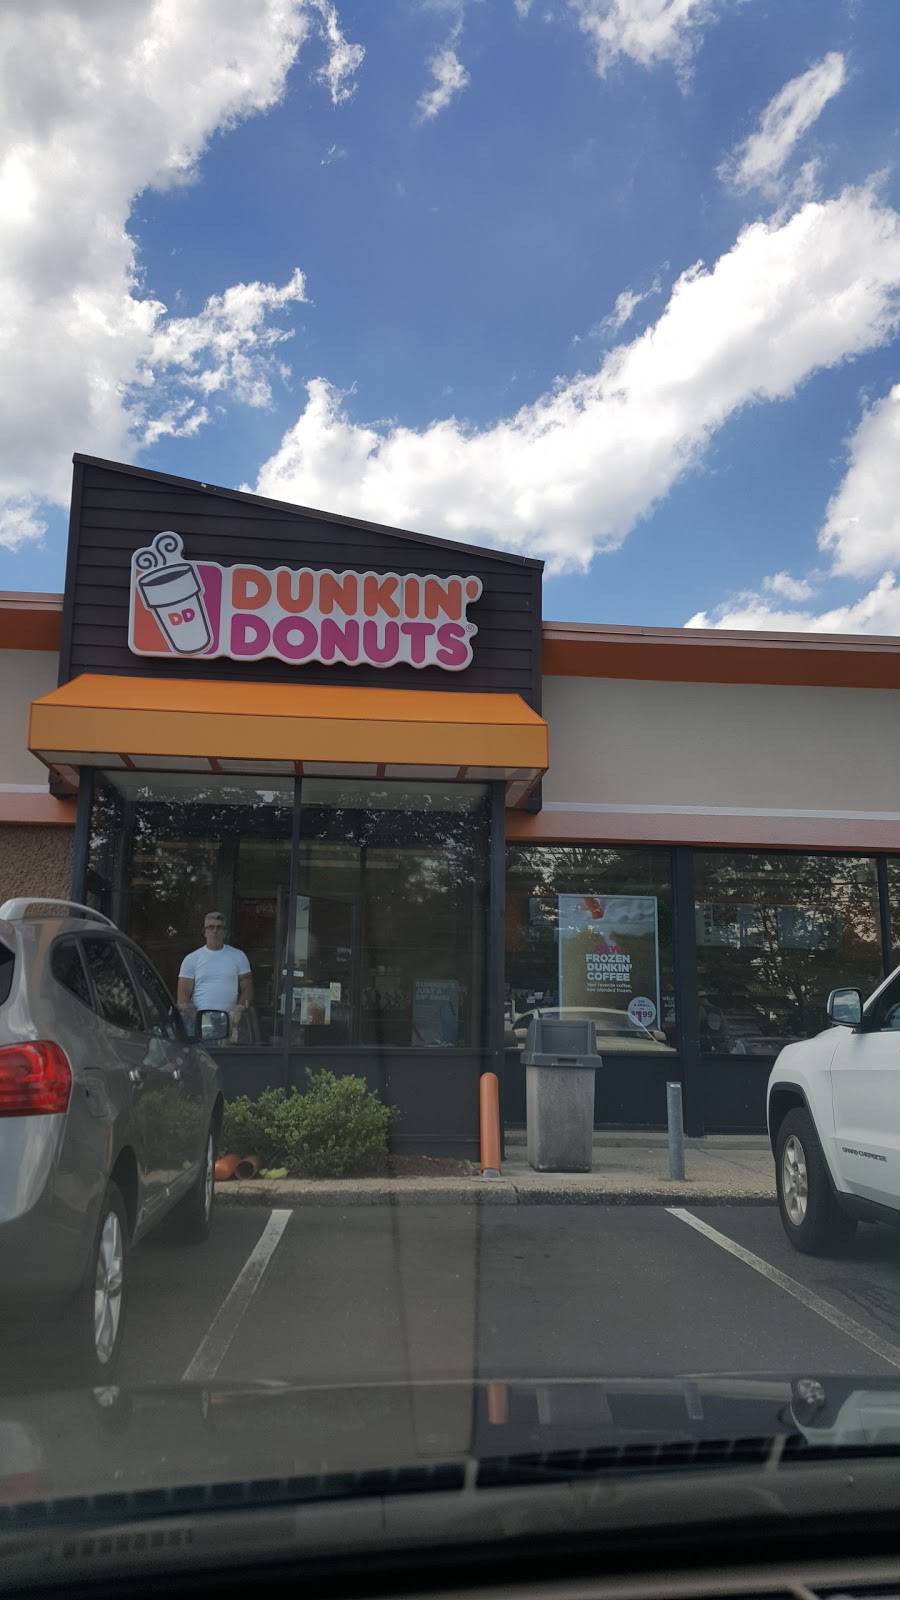 Dunkin Donuts | cafe | 1068 Old Country Rd, Plainview, NY 11803, USA | 5169350205 OR +1 516-935-0205